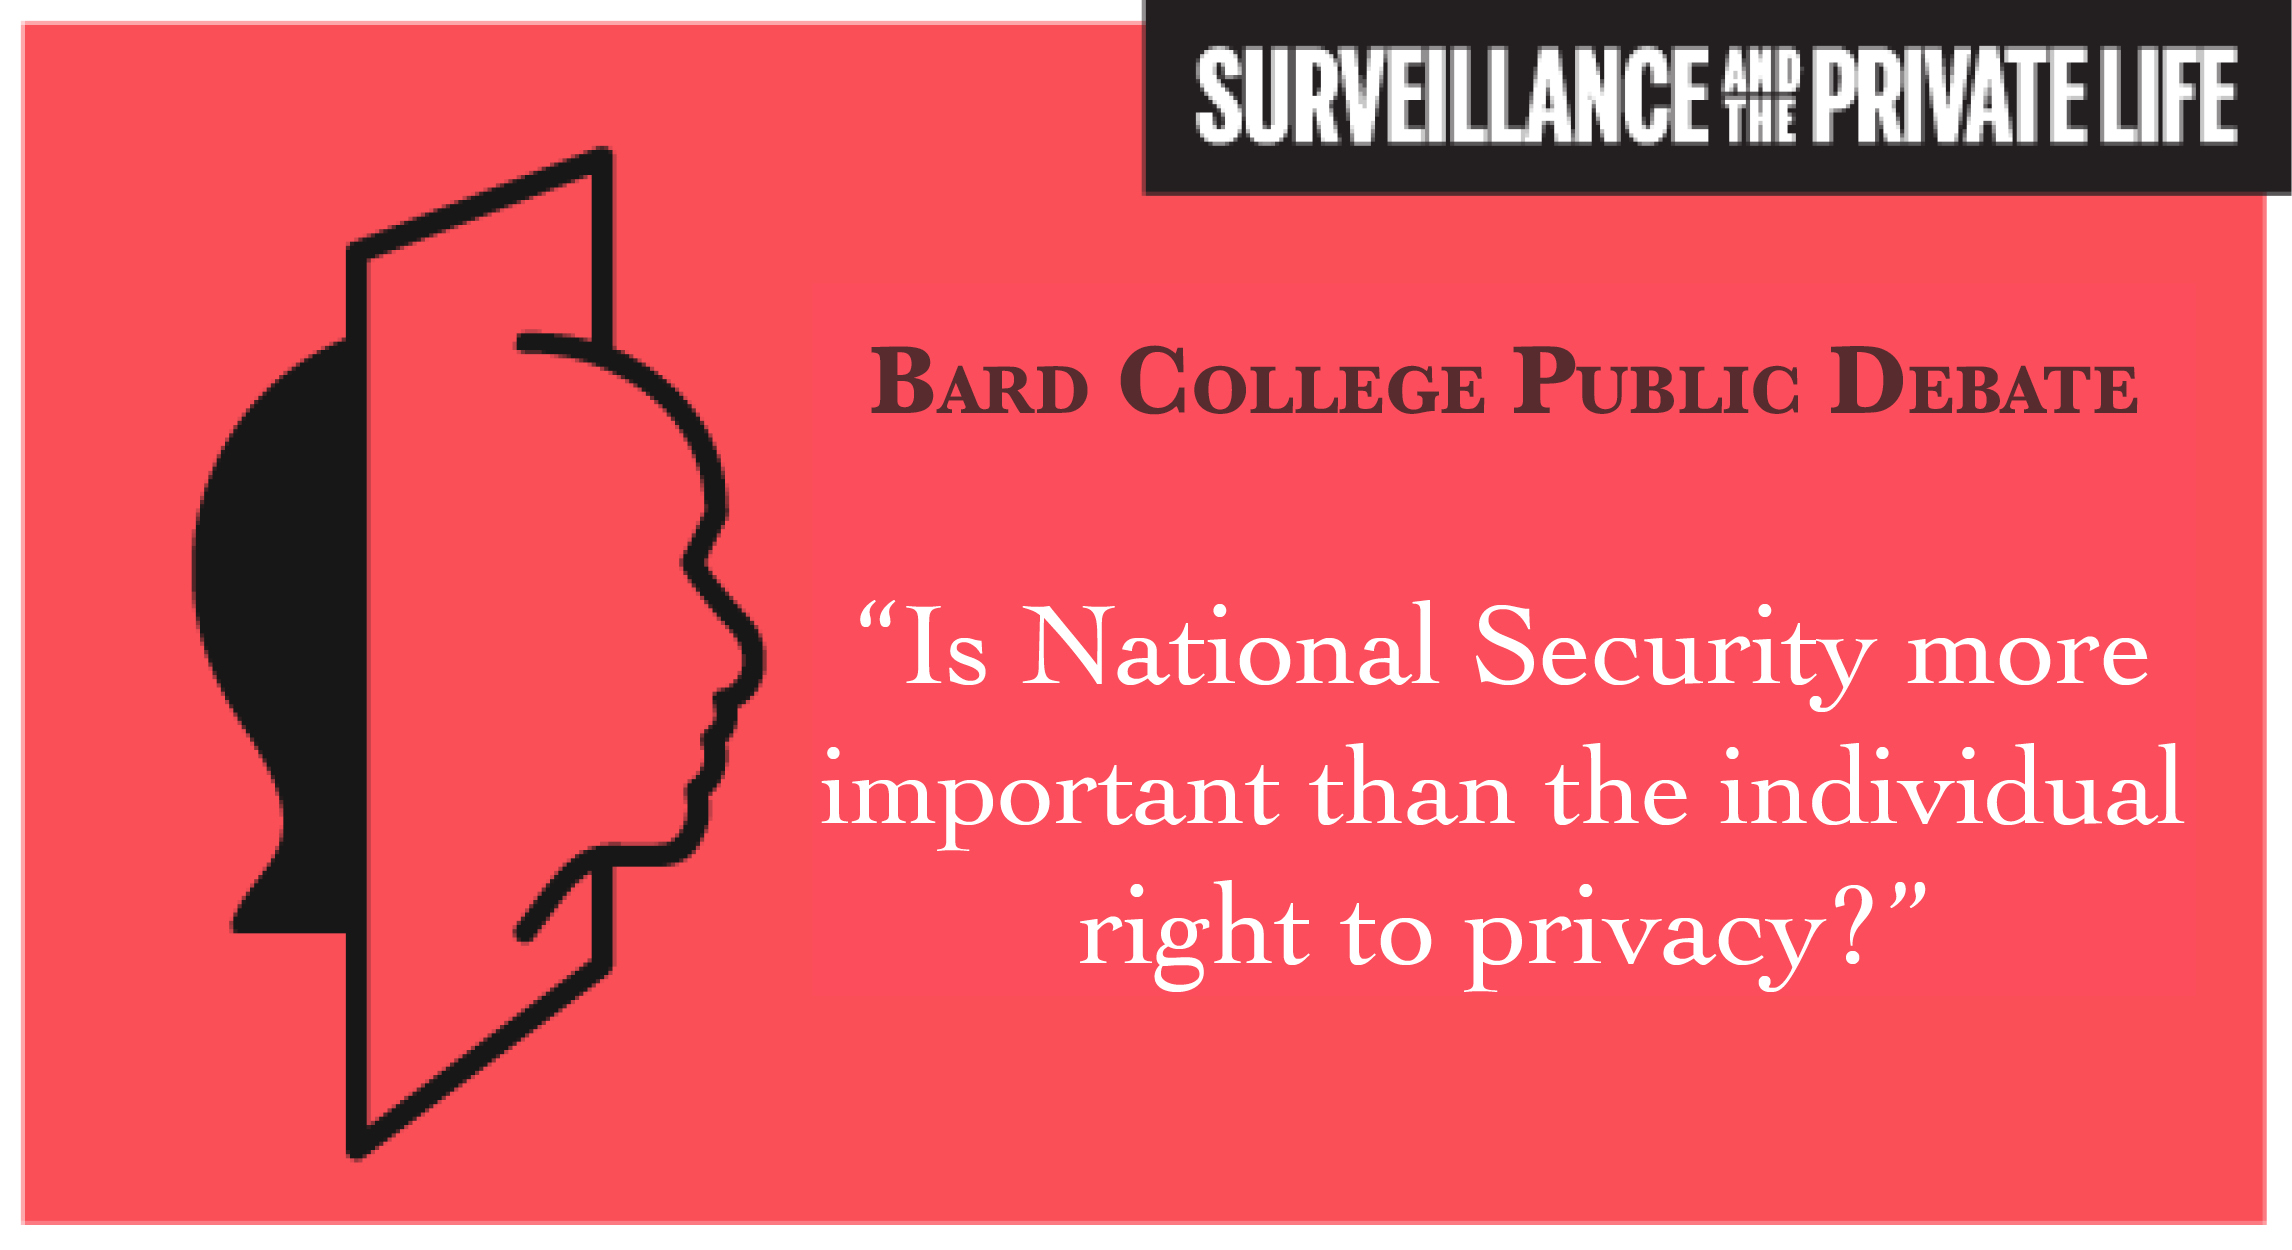 [Bard College Public Debate: "Is national security more important than the individual right to privacy?"] 